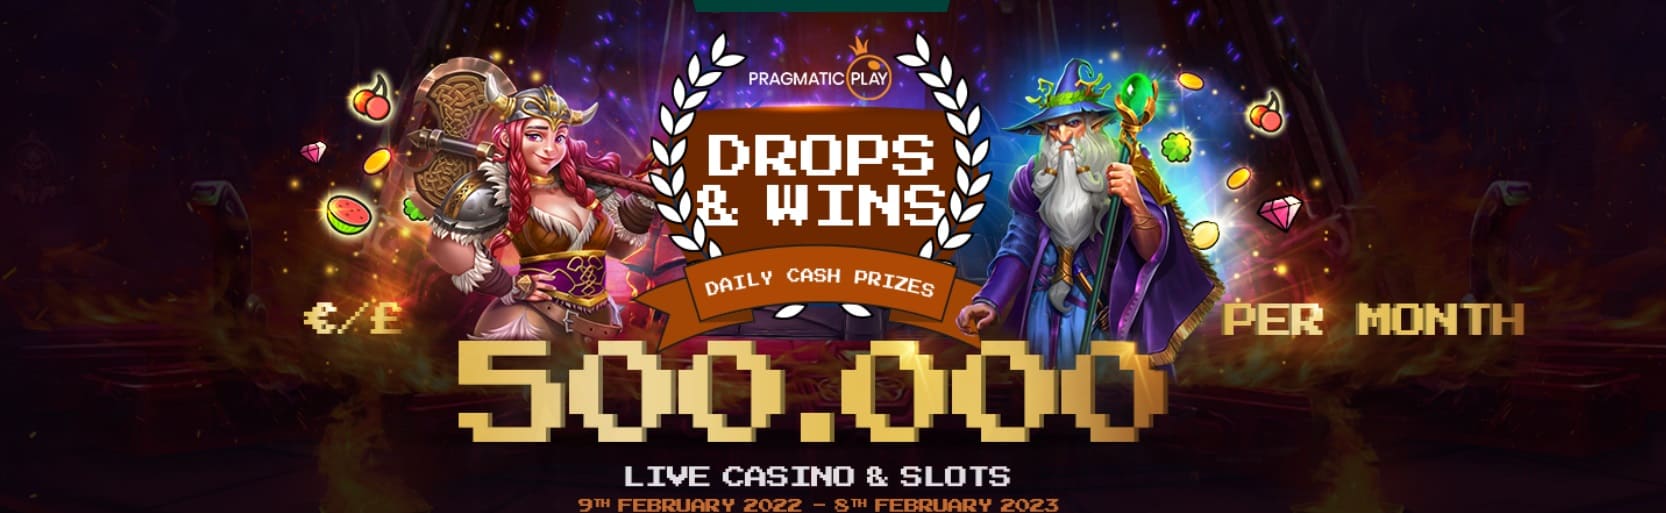 bitkingzCasino drop and wins